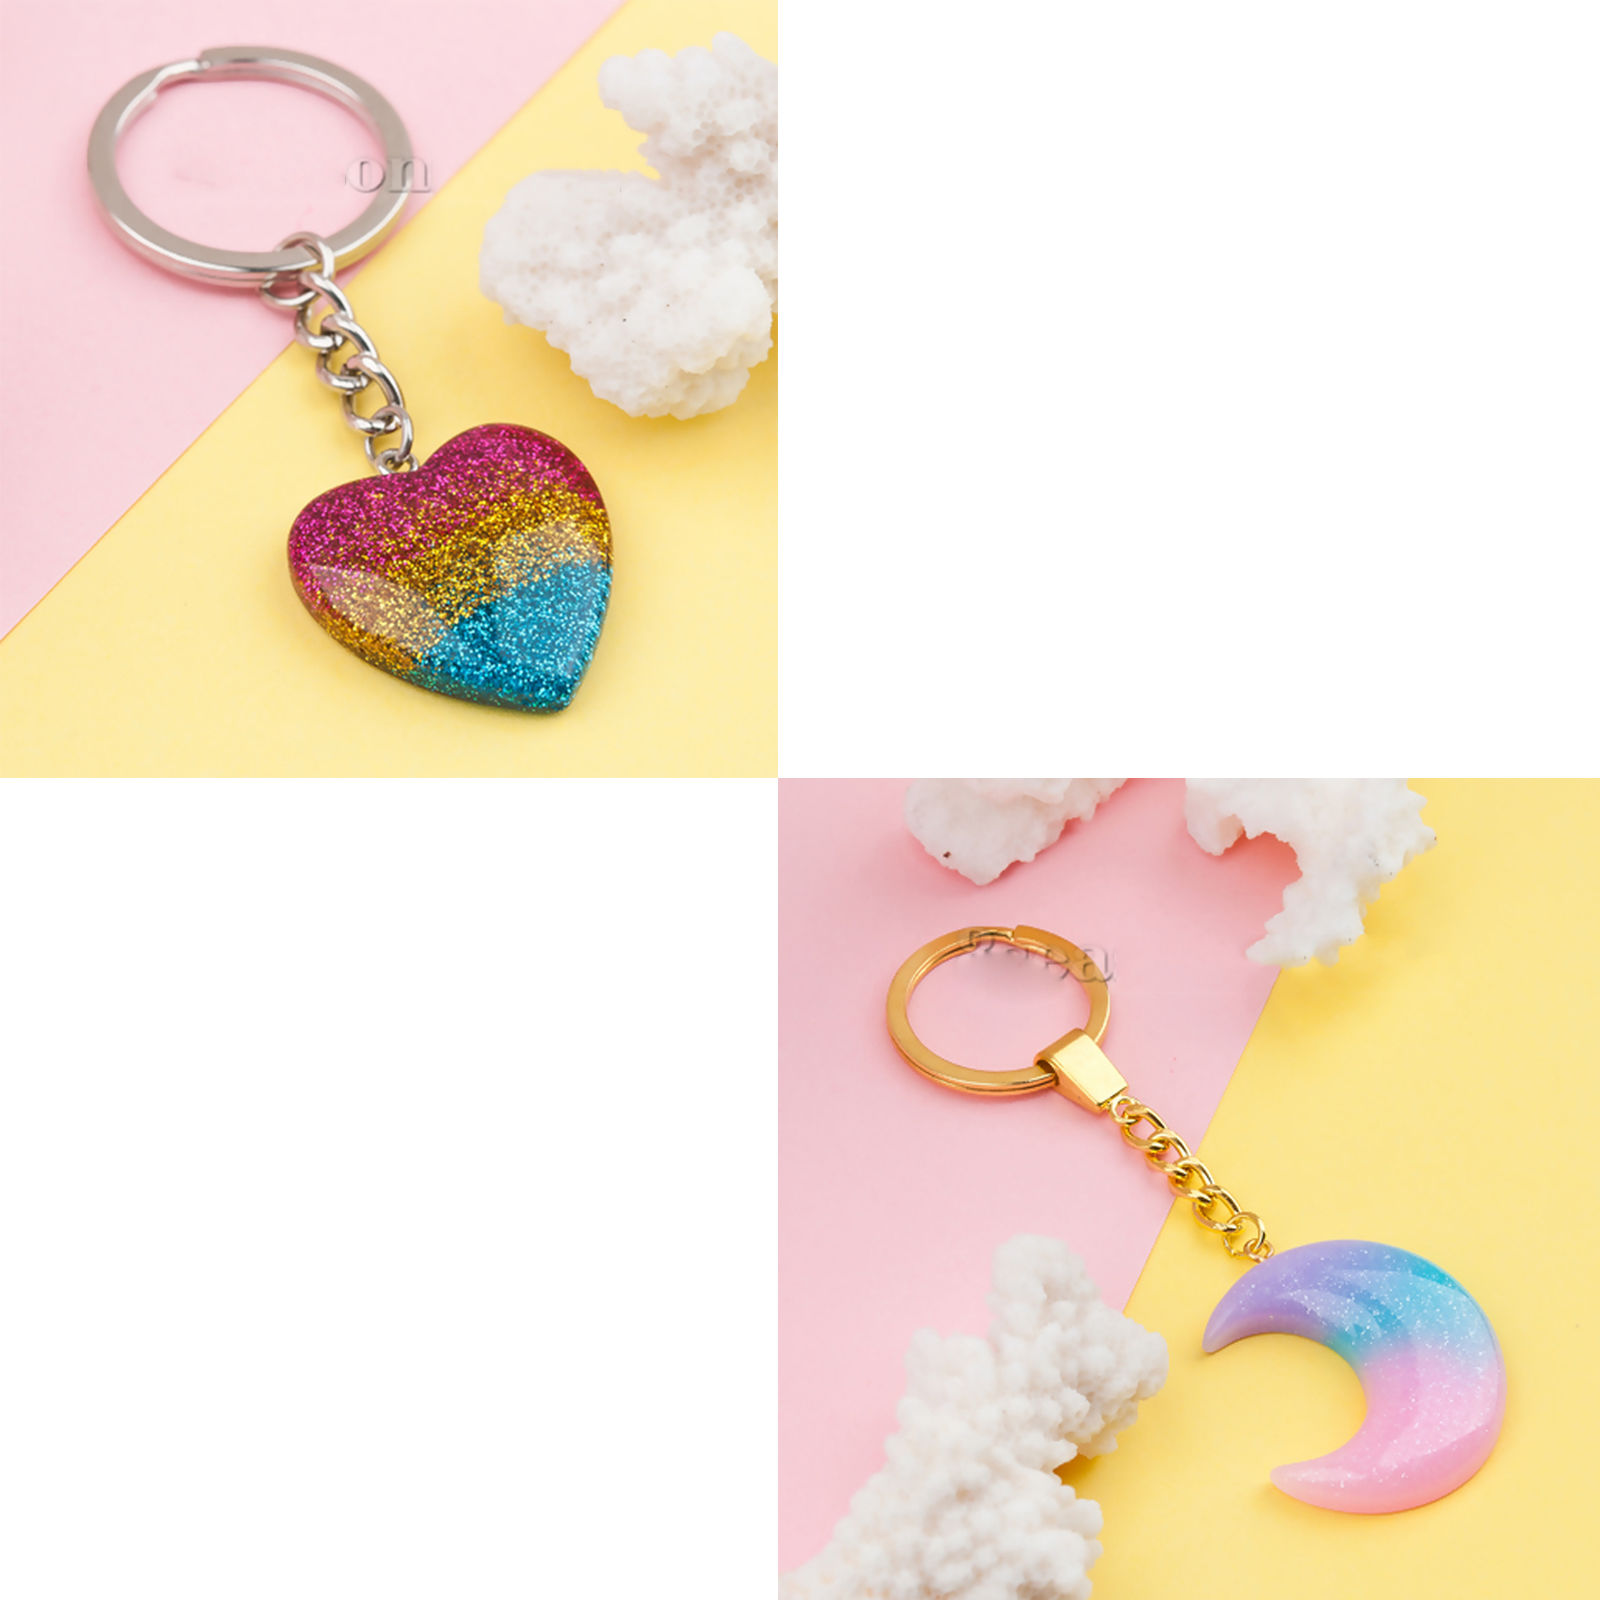 Picture of Cotton & Resin Keychain & Keyring Bowknot Yellow Pink Flower Glitter 11cm x 4.4cm, 1 Piece